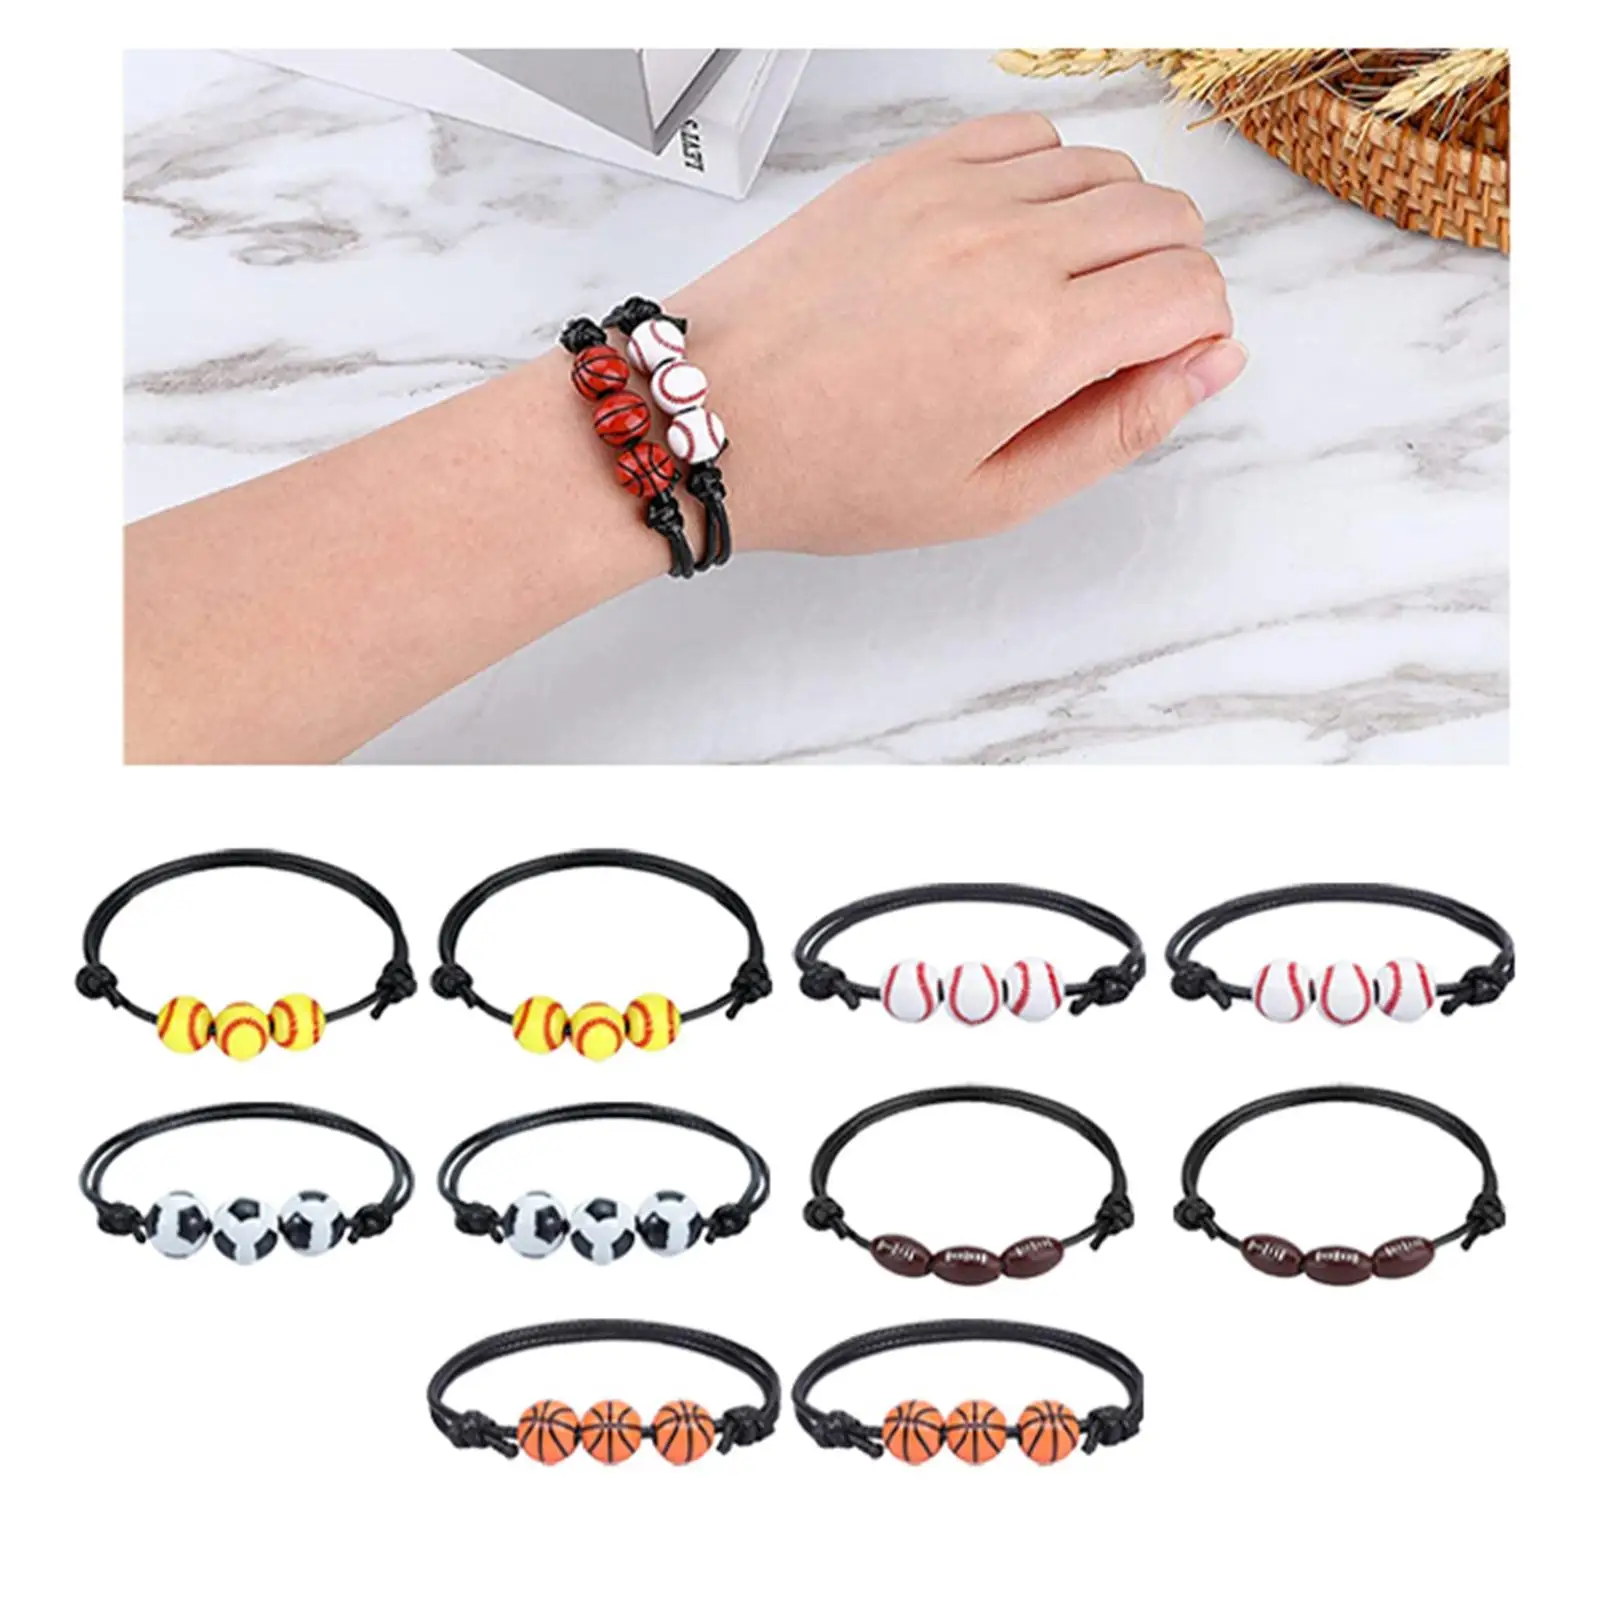 10 Pieces Braided Bracelets Adjustable Braided Wristband Baseball Ball Charms for Men Women Athletes